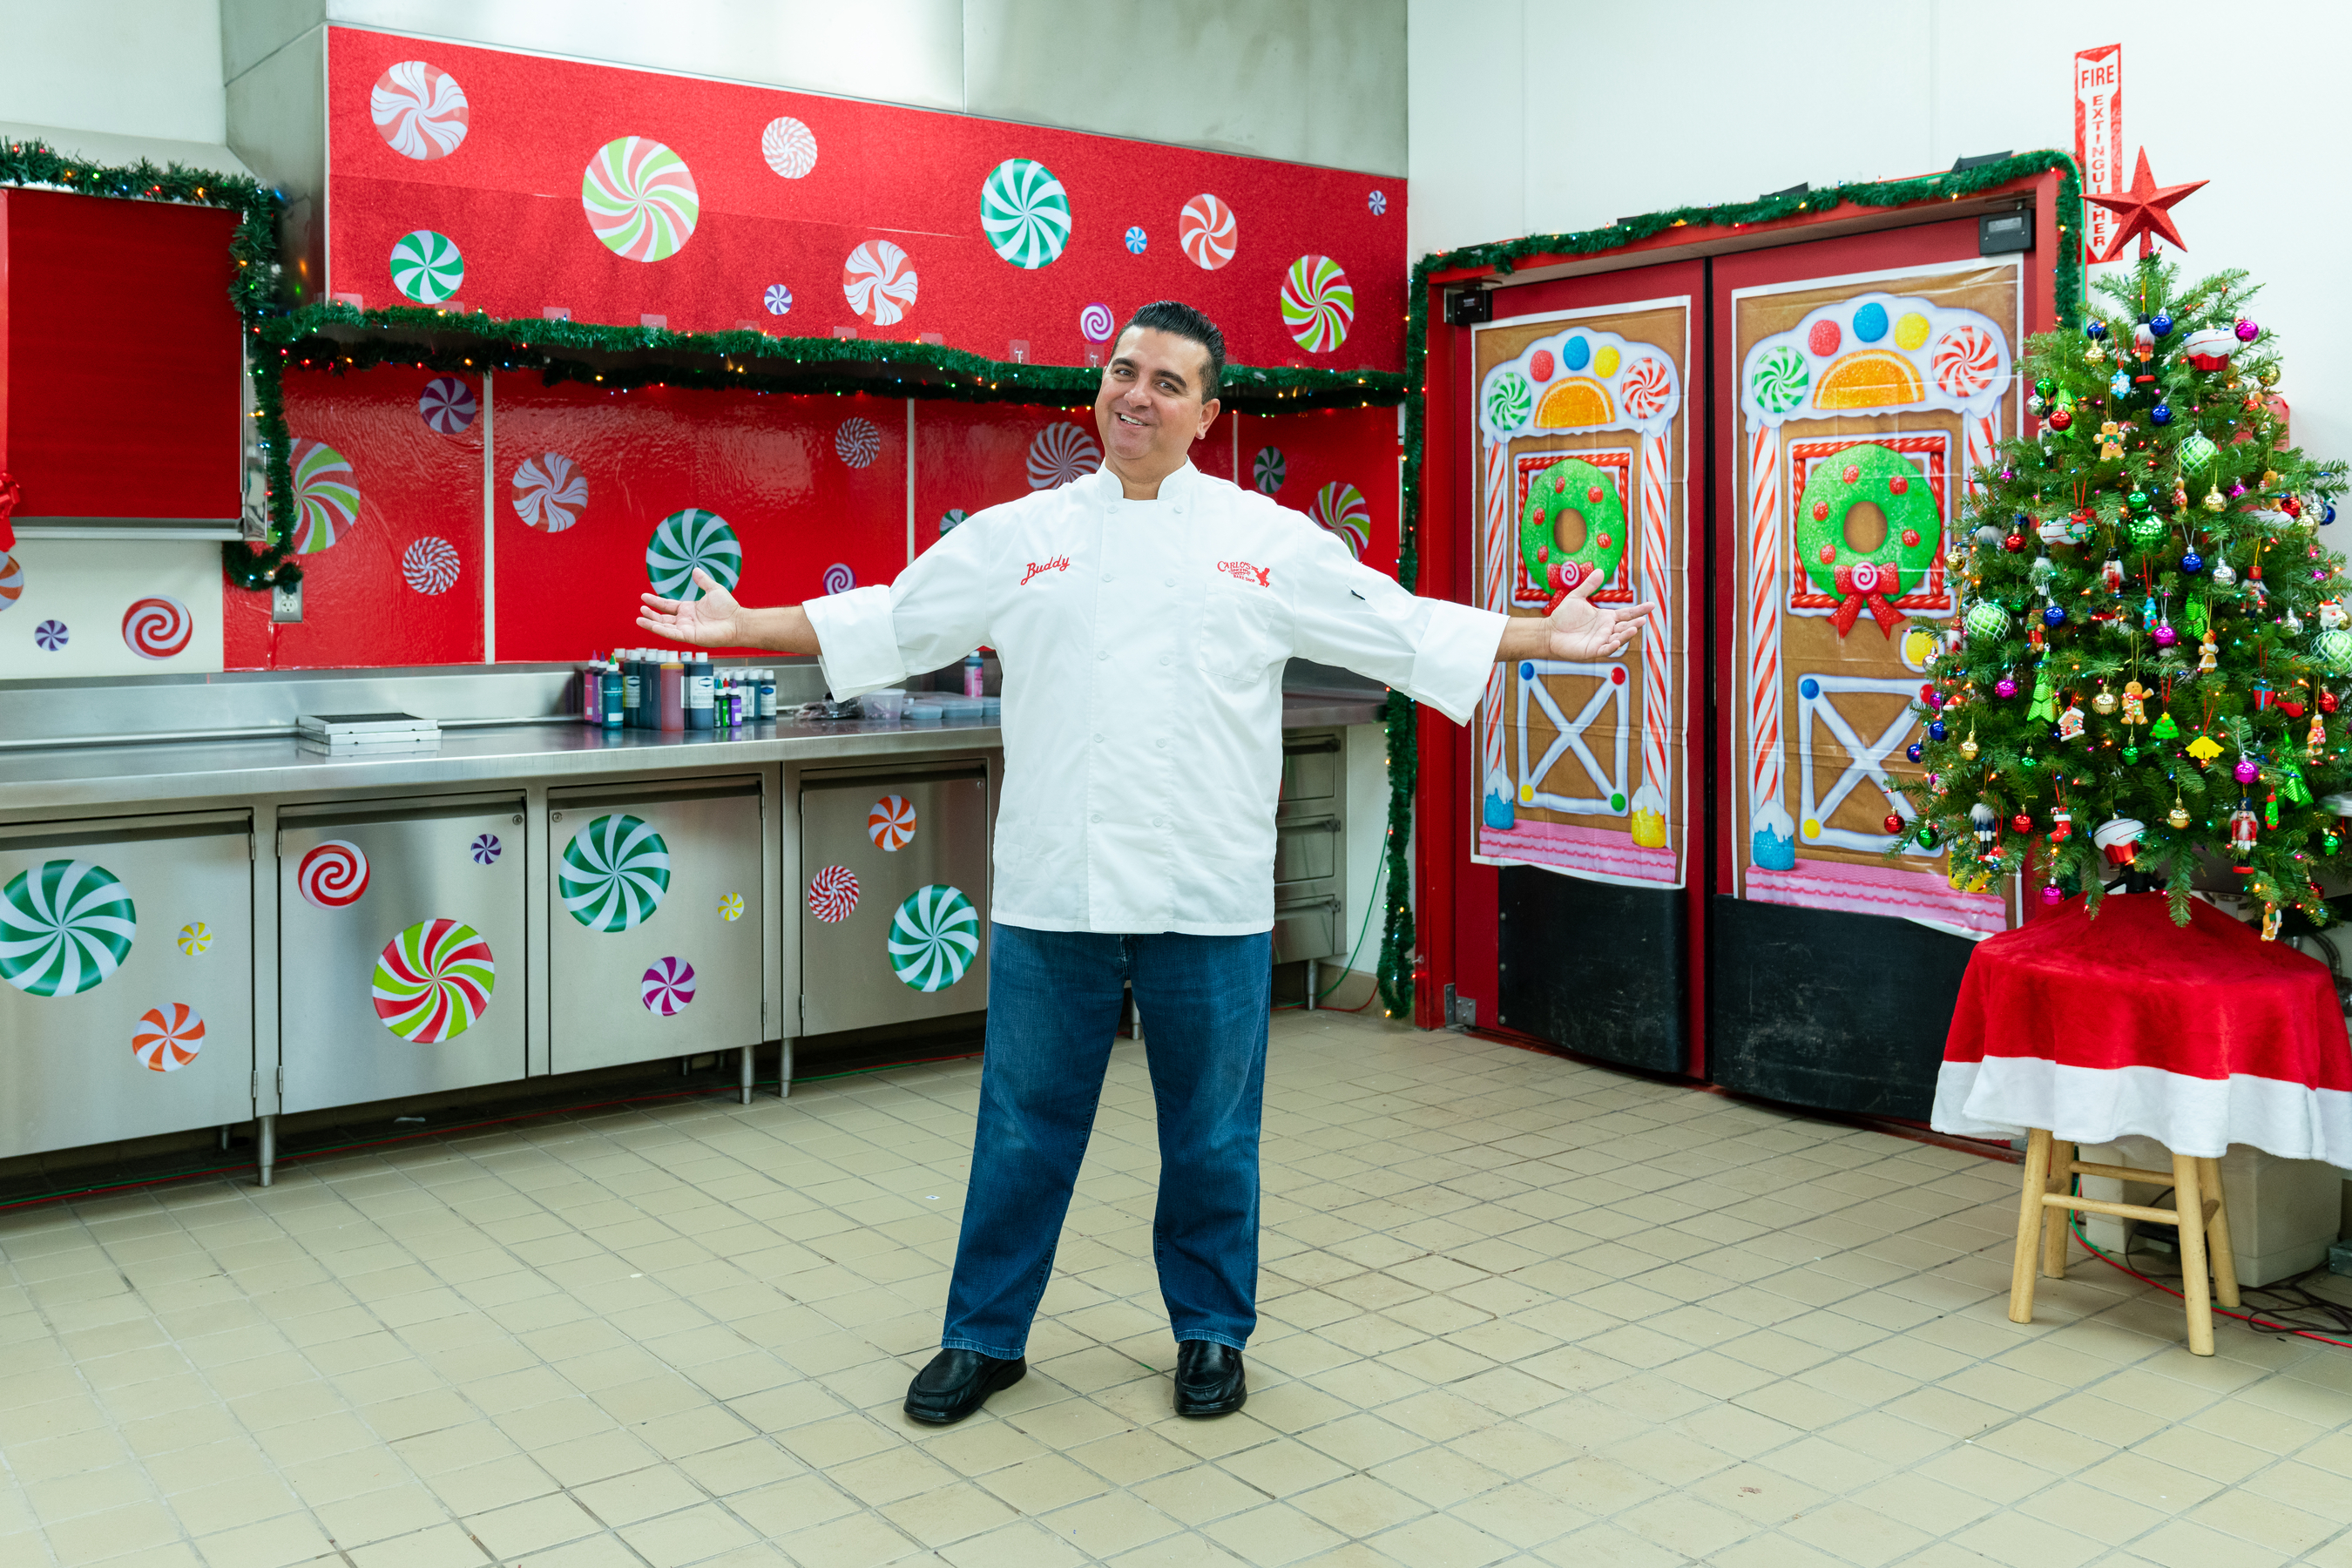 Buddy vs. Christmas' pits the Cake Boss against craft masters | to watch, live stream, TV channel, time silive.com